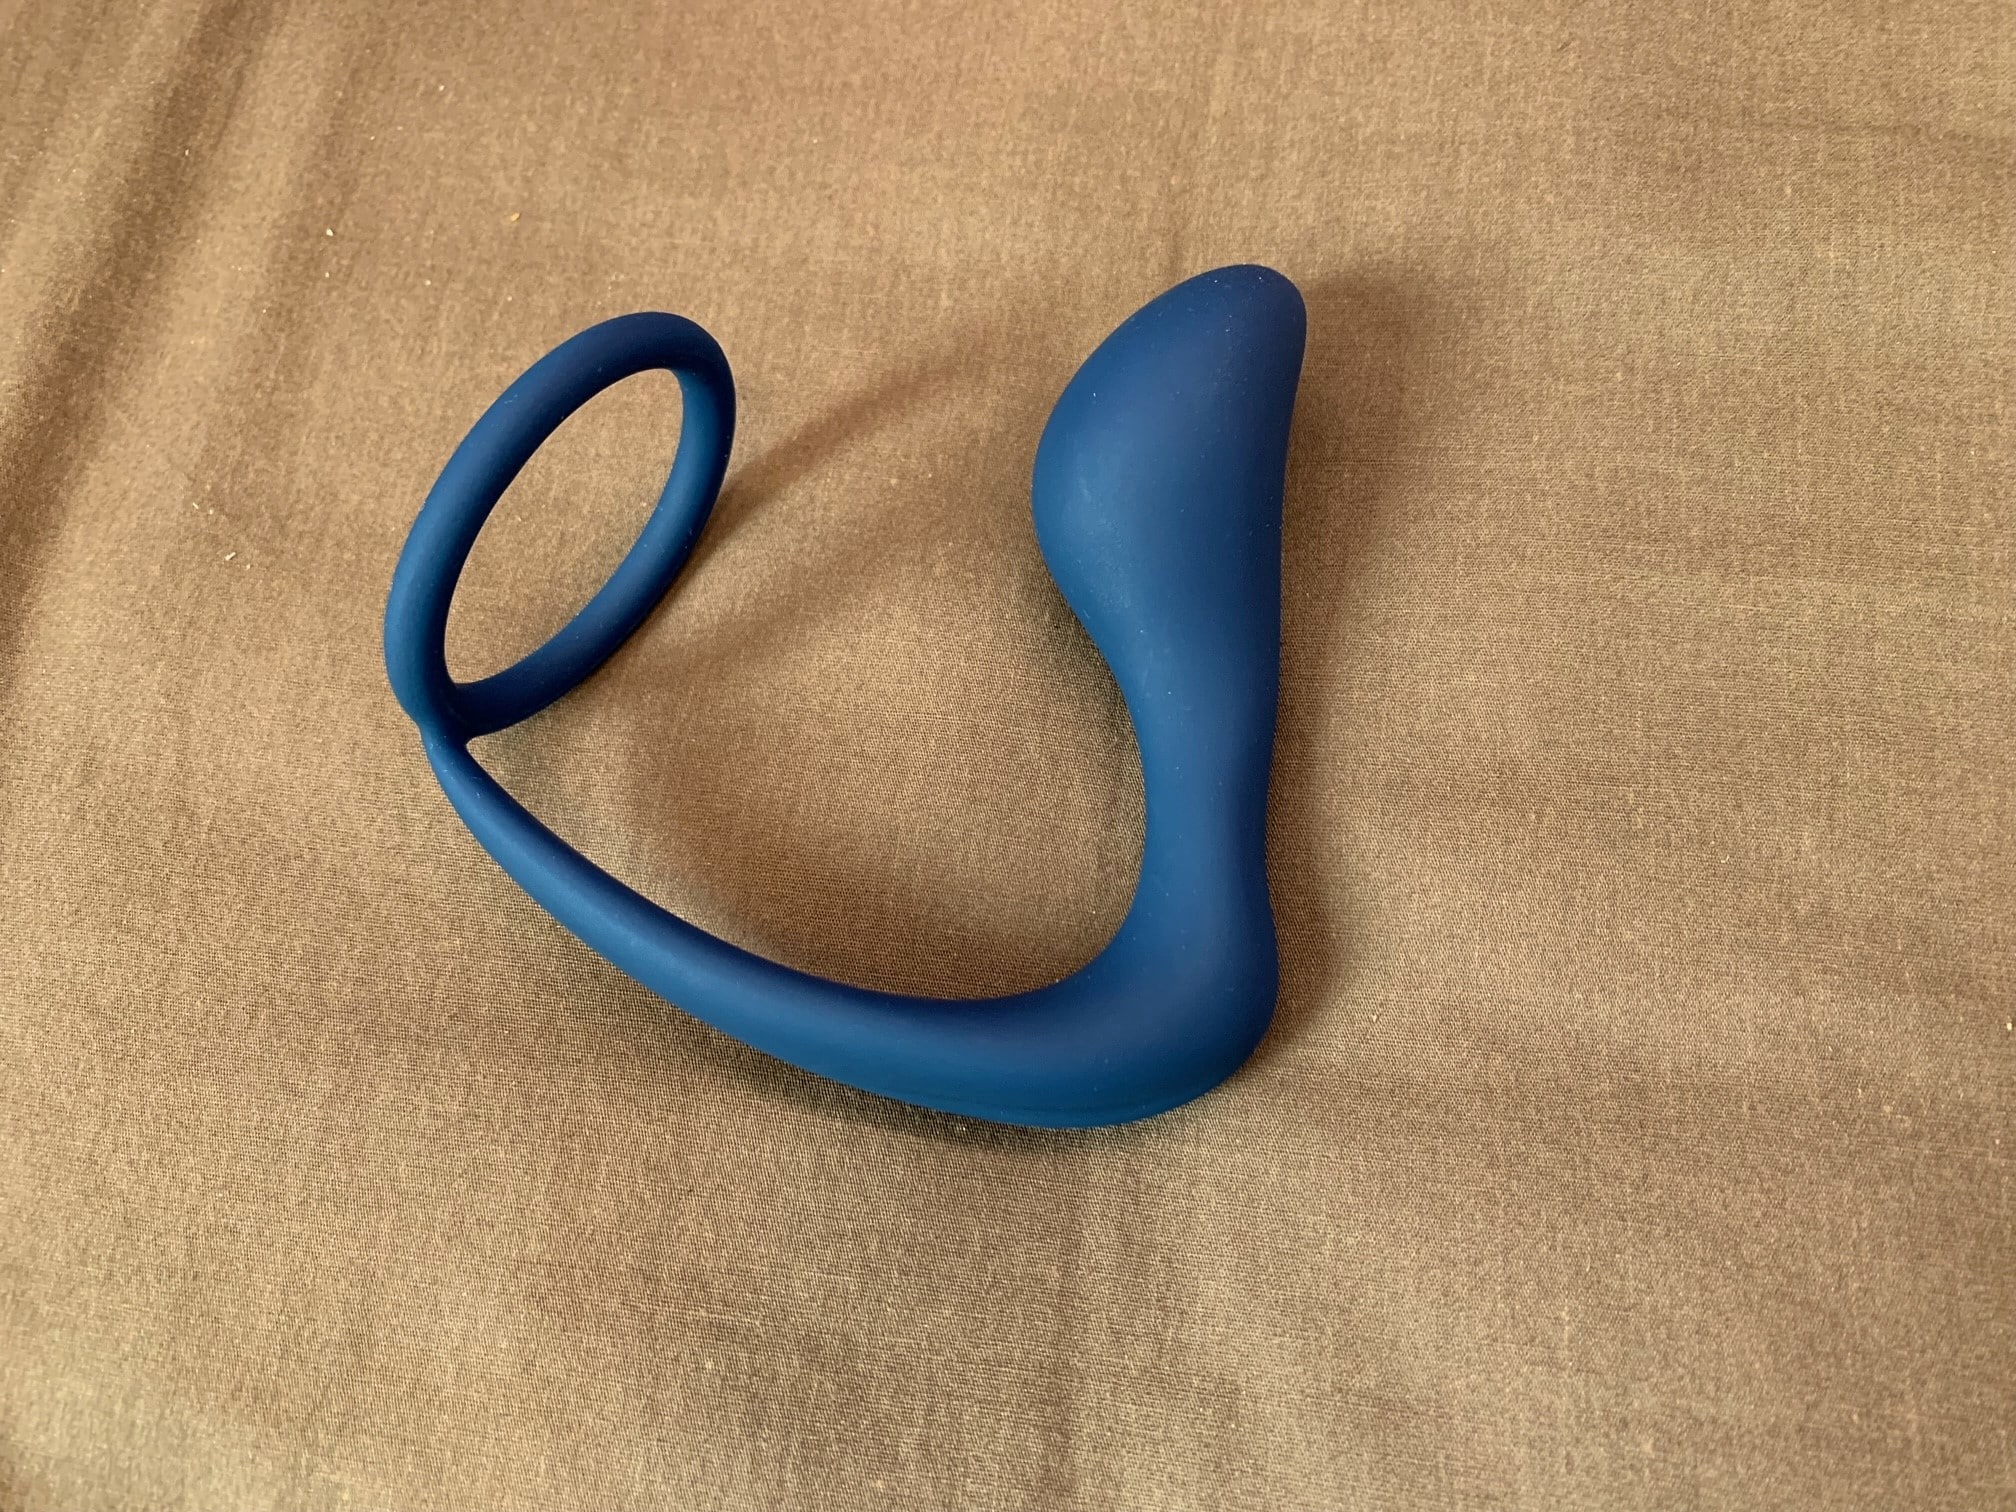 Lynk Plugged Cock Ring Prostate Massager. Slide 4